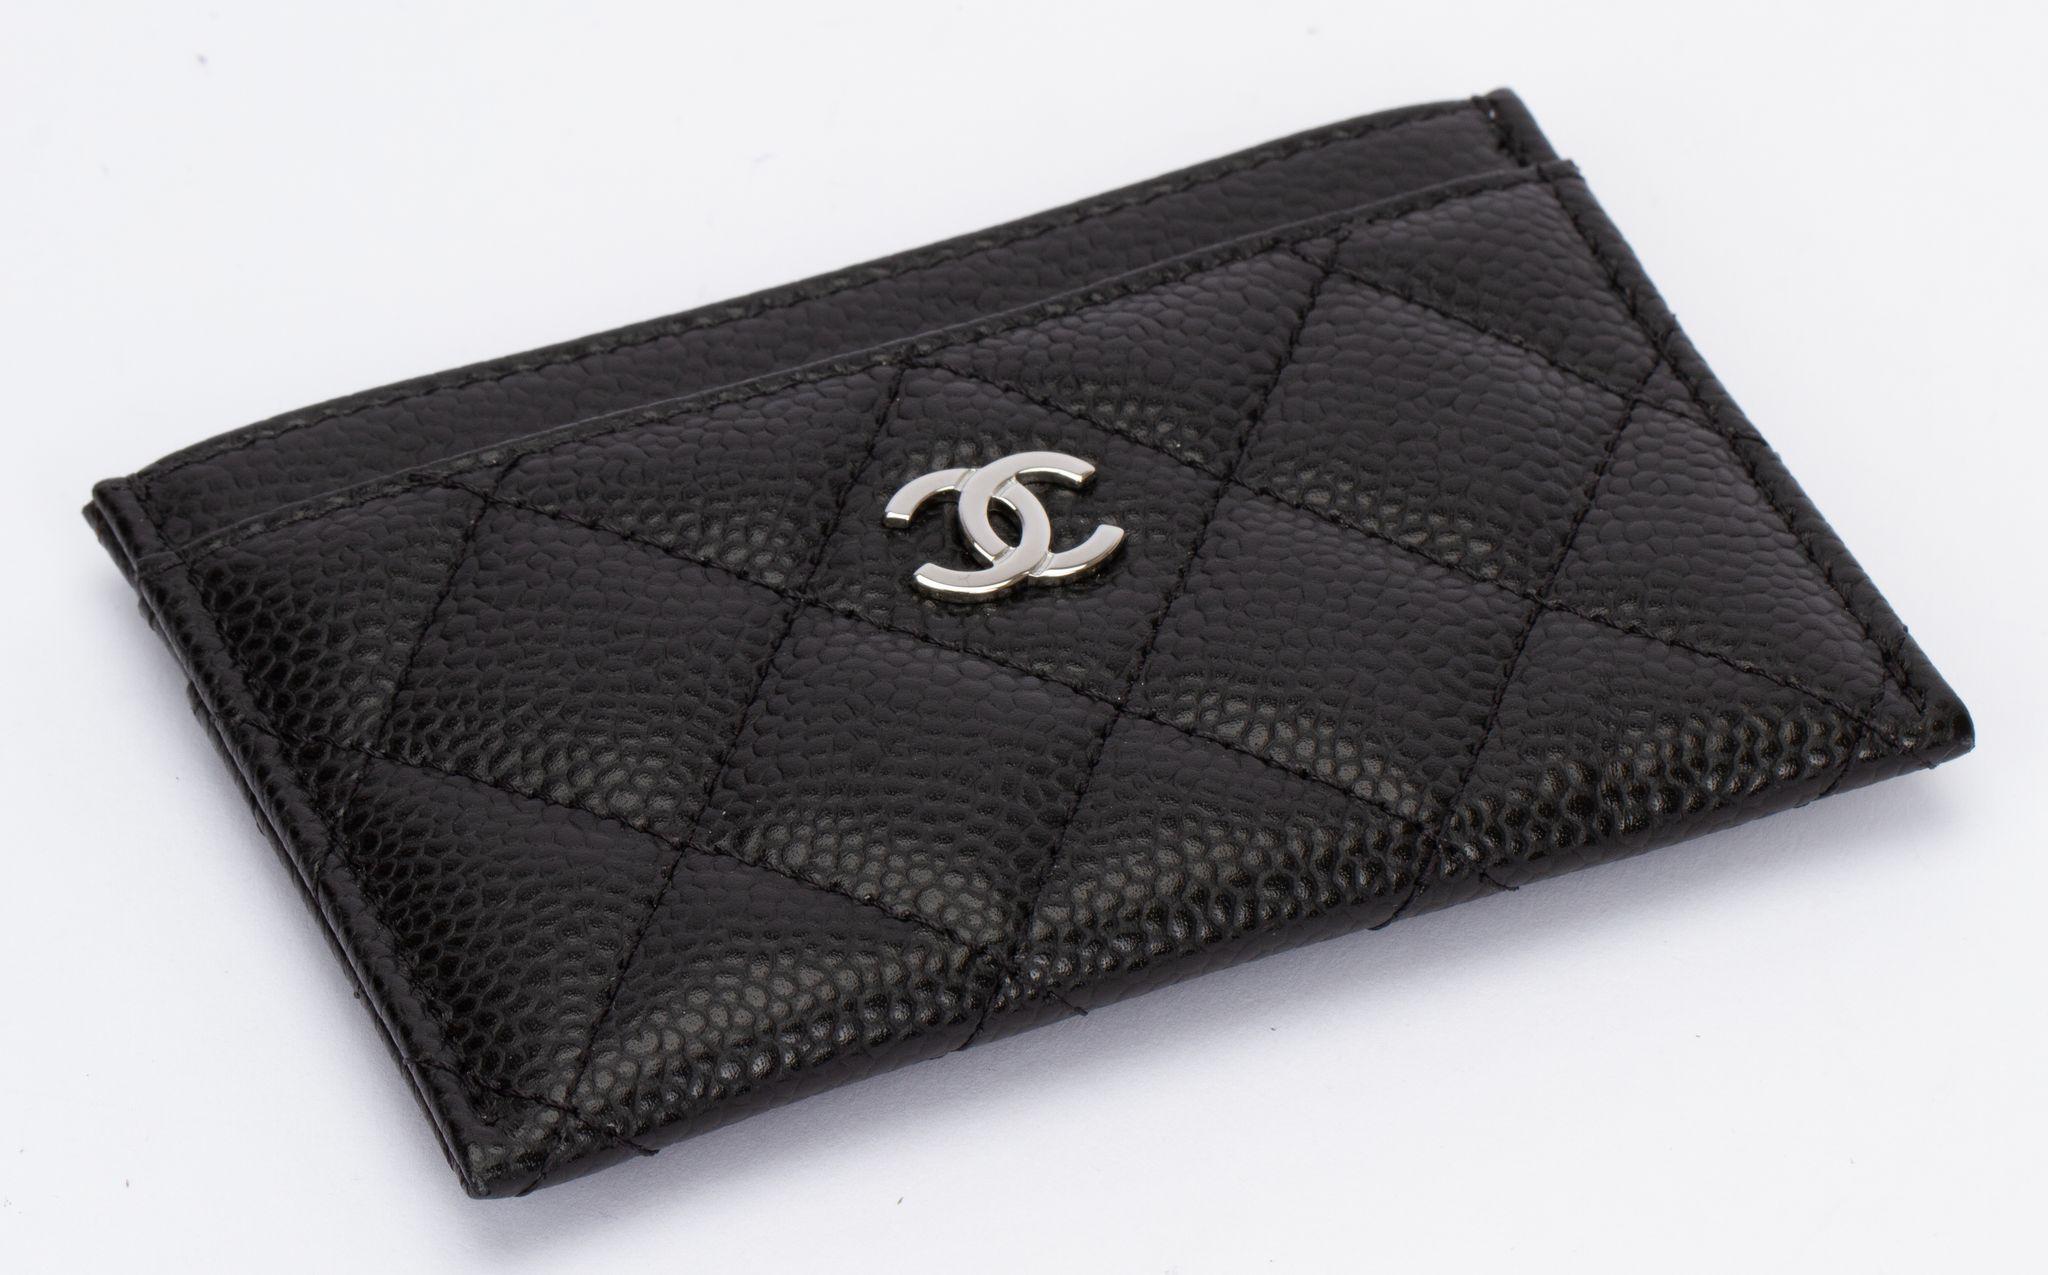 Chanel Caviar Quilted Card Holder in Black. This card case is made of diamond-quilted caviar leather in black. The case has card slots on either side of the main compartment, with a polished silver Chanel CC logo on the front.It is brand new and